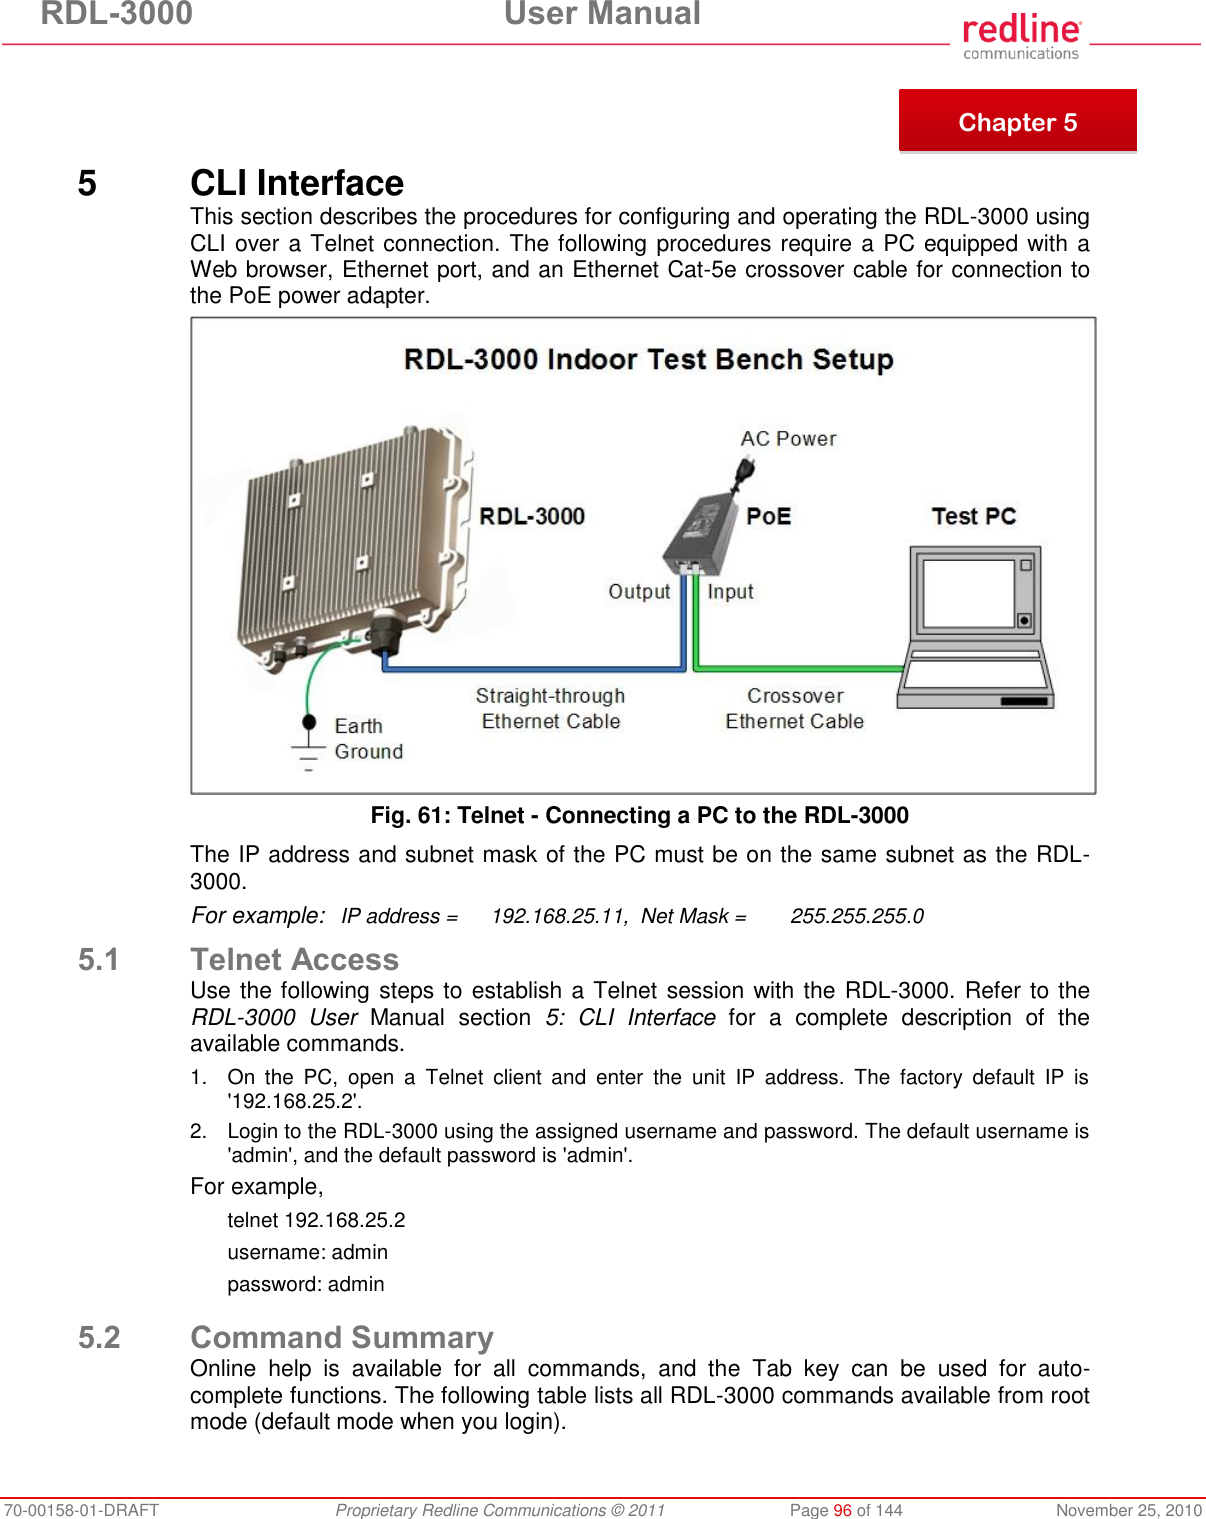 RDL-3000  User Manual 70-00158-01-DRAFT  Proprietary Redline Communications © 2011  Page 96 of 144  November 25, 2010      5  CLI Interface This section describes the procedures for configuring and operating the RDL-3000 using CLI over a Telnet connection. The following procedures require a PC equipped with a Web browser, Ethernet port, and an Ethernet Cat-5e crossover cable for connection to the PoE power adapter.  Fig. 61: Telnet - Connecting a PC to the RDL-3000 The IP address and subnet mask of the PC must be on the same subnet as the RDL-3000.  For example:   IP address =  192.168.25.11,  Net Mask =  255.255.255.0 5.1 Telnet Access Use the following steps to establish a Telnet session with the RDL-3000. Refer to the RDL-3000  User  Manual  section  5:  CLI  Interface  for  a  complete  description  of  the available commands.  1.  On  the  PC,  open  a  Telnet  client  and  enter  the  unit  IP  address.  The  factory  default  IP  is &apos;192.168.25.2&apos;. 2.  Login to the RDL-3000 using the assigned username and password. The default username is &apos;admin&apos;, and the default password is &apos;admin&apos;. For example,  telnet 192.168.25.2 username: admin password: admin  5.2 Command Summary Online  help  is  available  for  all  commands,  and  the  Tab  key  can  be  used  for  auto-complete functions. The following table lists all RDL-3000 commands available from root mode (default mode when you login).  Chapter 5 